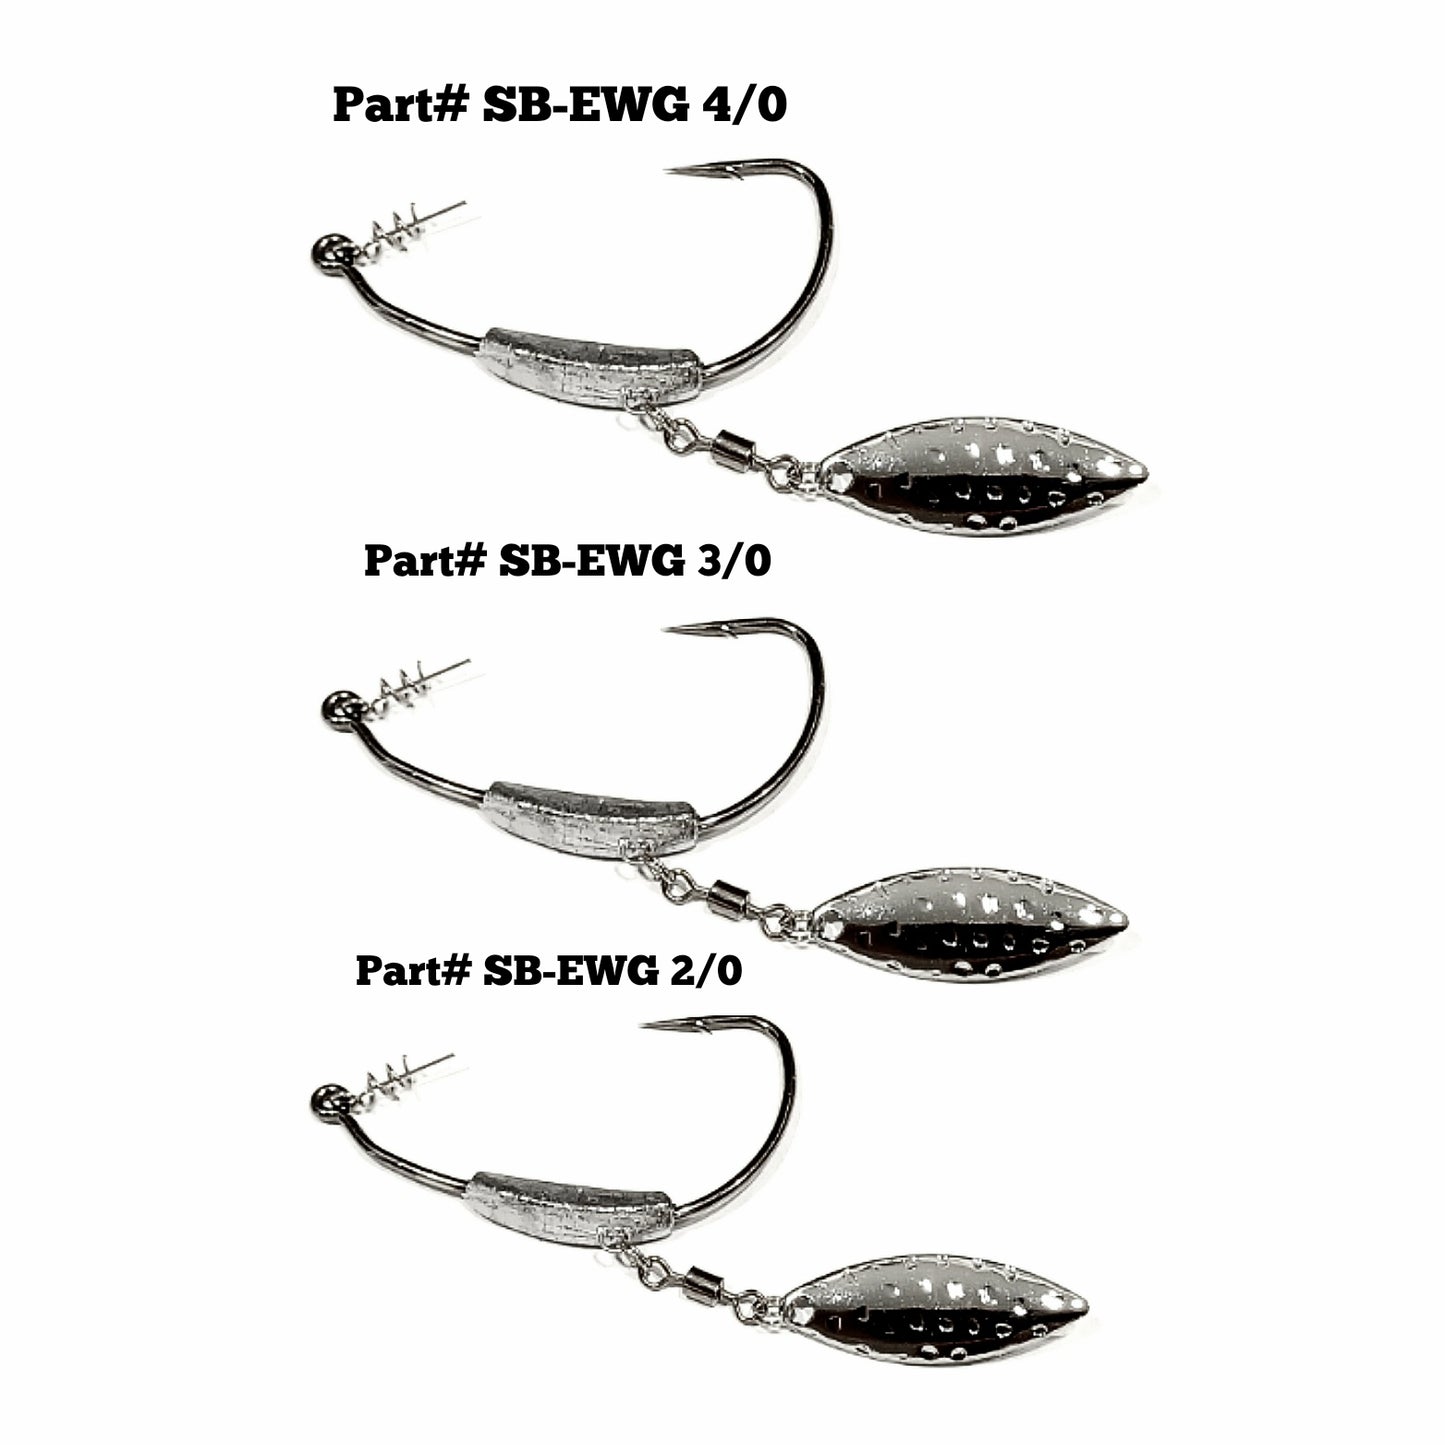 Wide Gap SPIN BLADE weedless heavy gauge weighted hooks with spring lock bait keeper (Bass Fishing -Swimbaits-Creature Baits-Grubs)